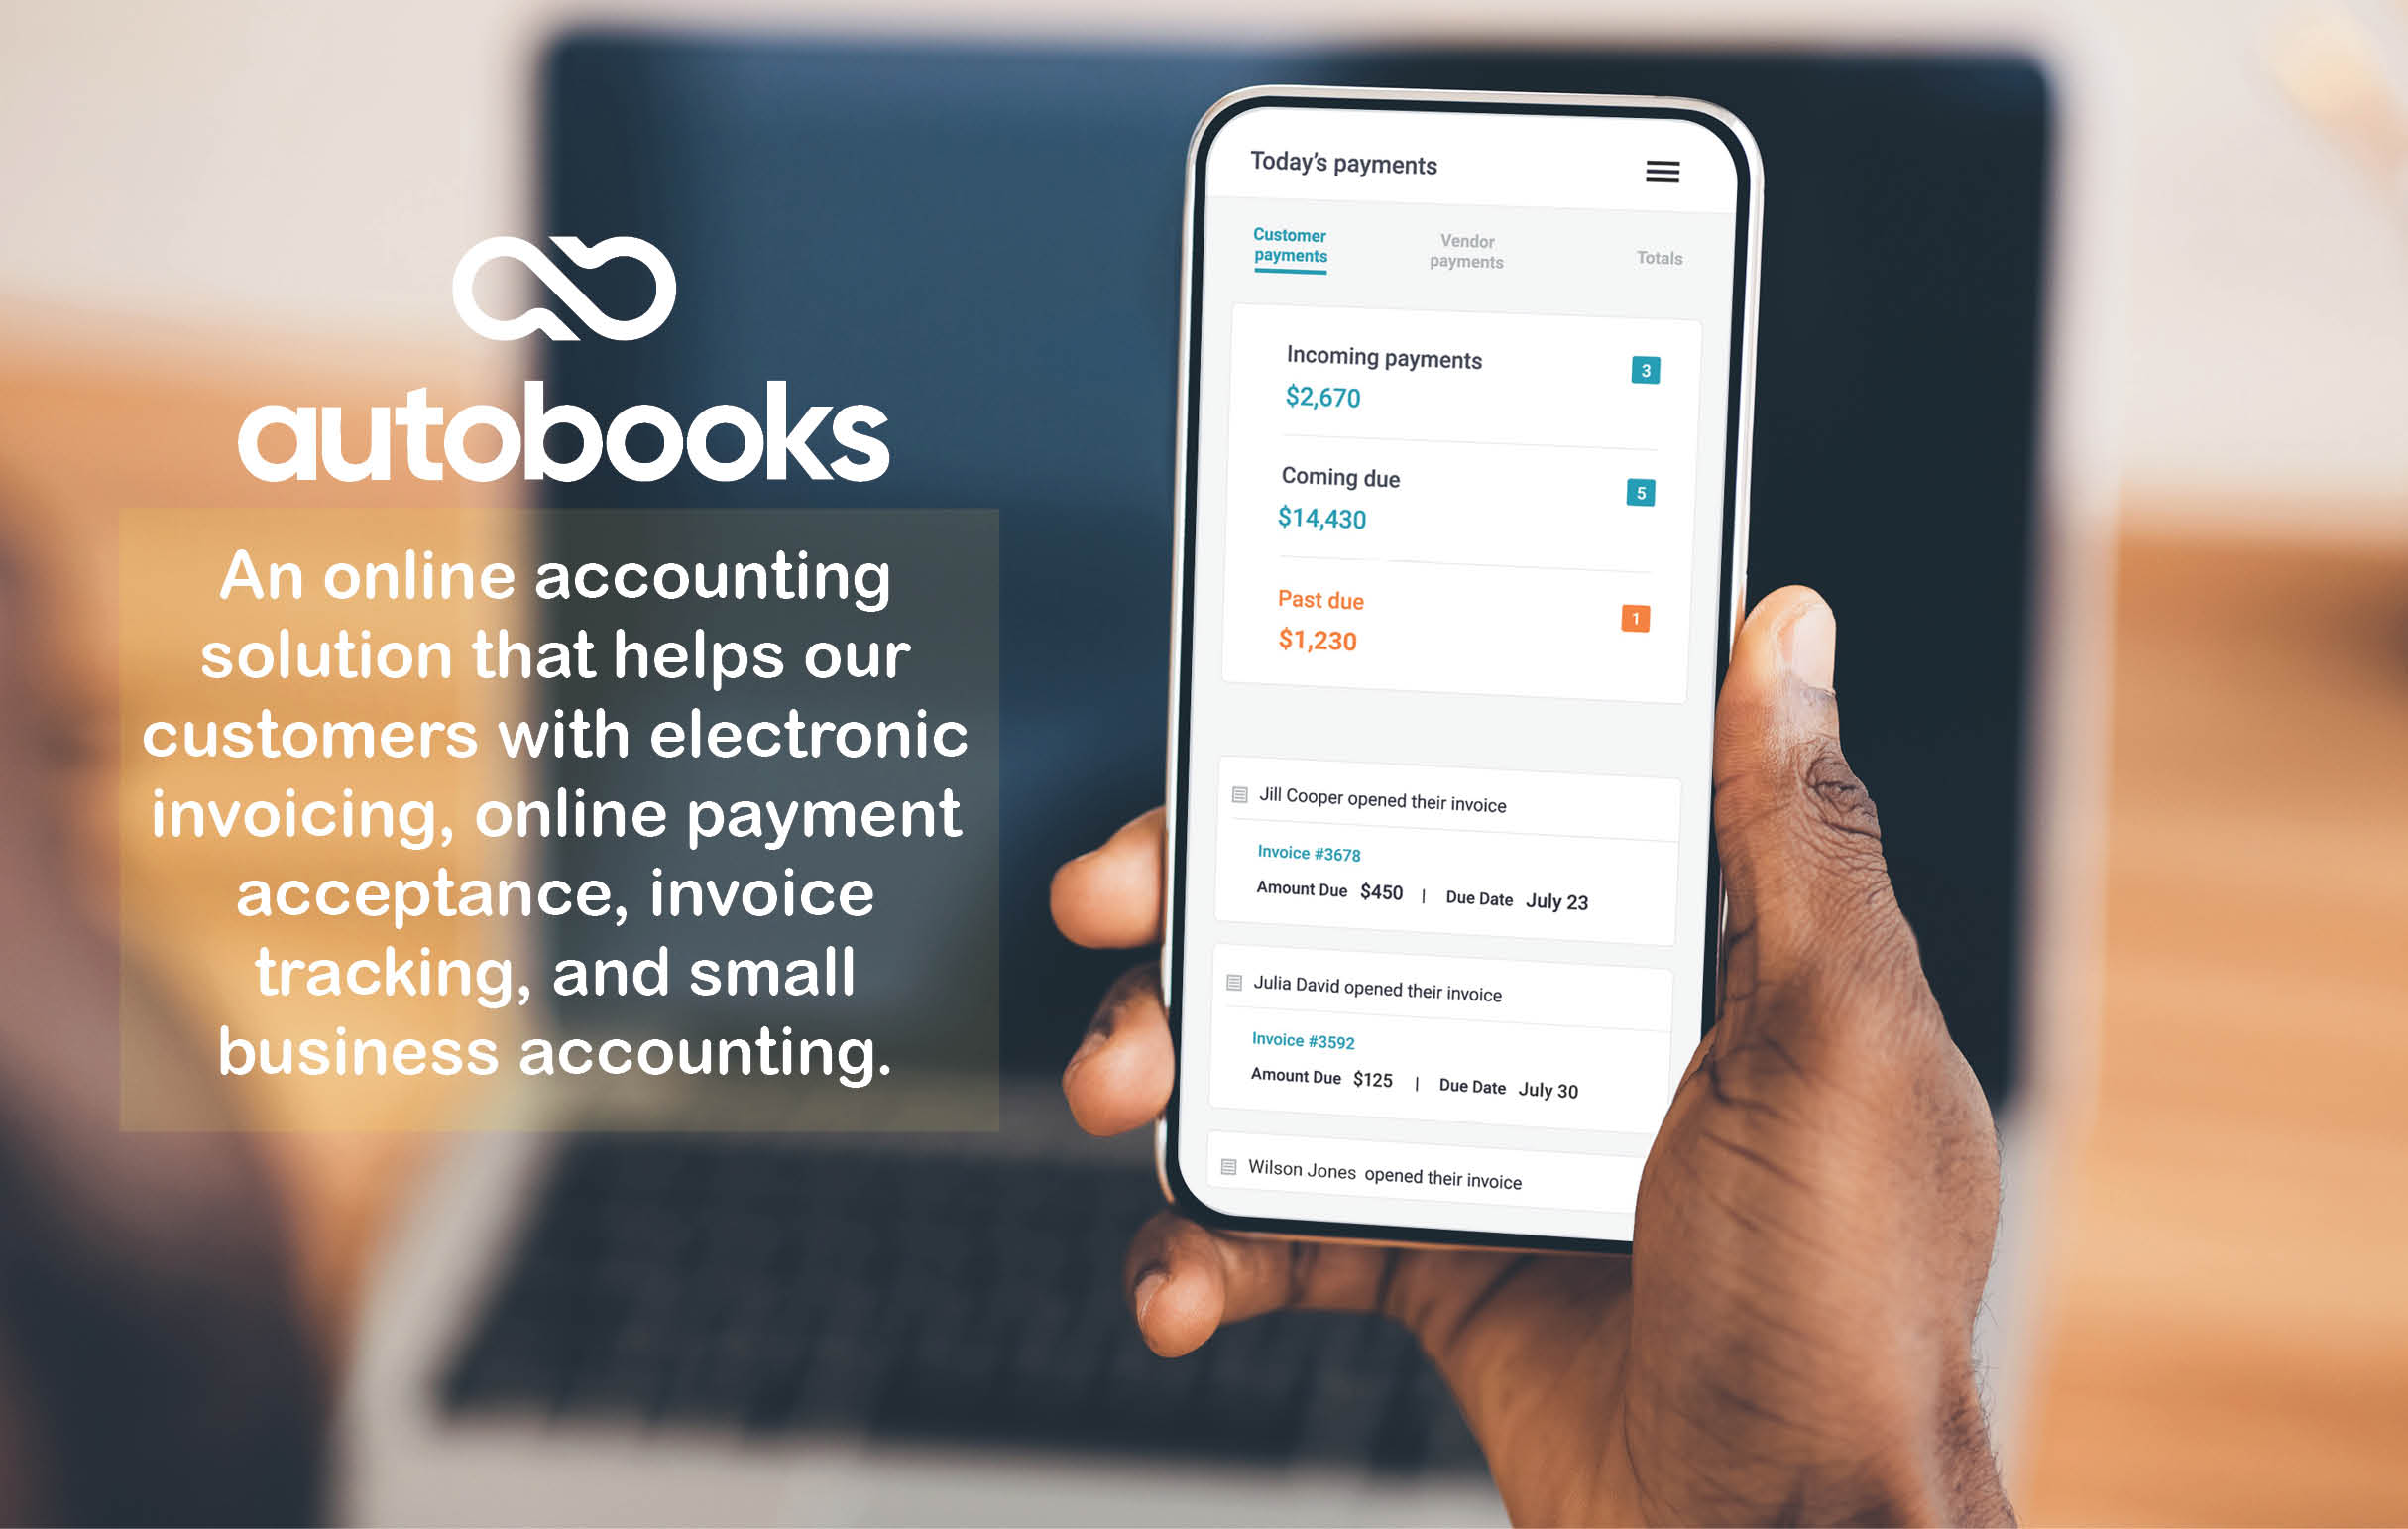 A laptop in the background with a man's hand holding a smartphone. The words "Autobooks, An online accounting solution that helps our customers with electronic invoicing, online payment acceptance, incoice tracking, and small business accounting." 